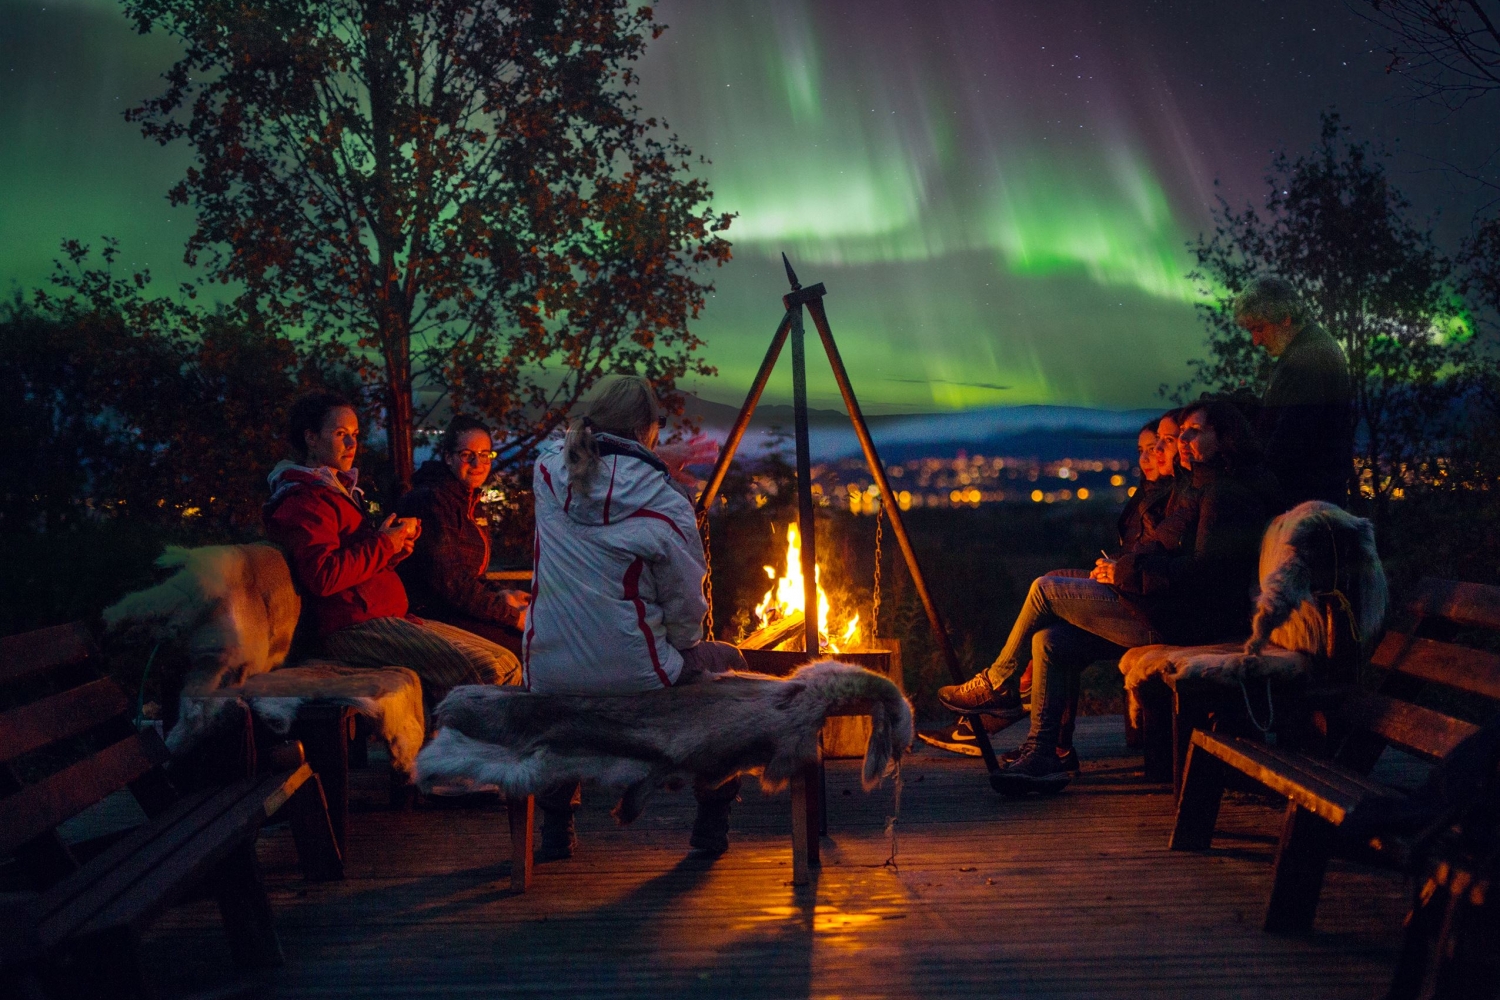 Guests gathered around a bonfire with Northern Lights in the background